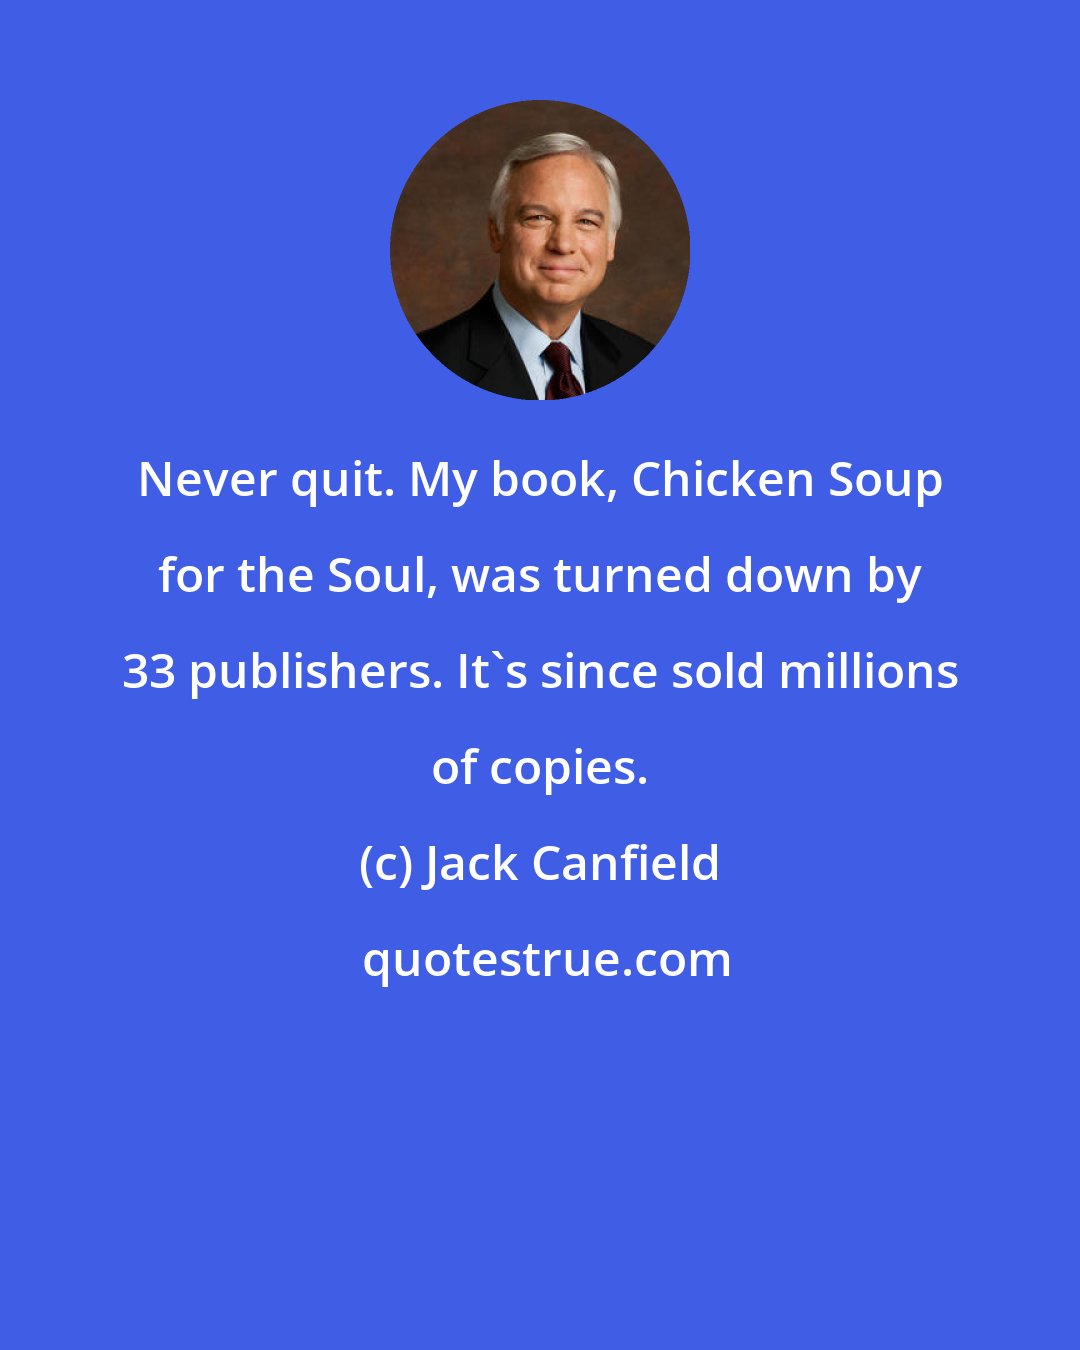 Jack Canfield: Never quit. My book, Chicken Soup for the Soul, was turned down by 33 publishers. It's since sold millions of copies.